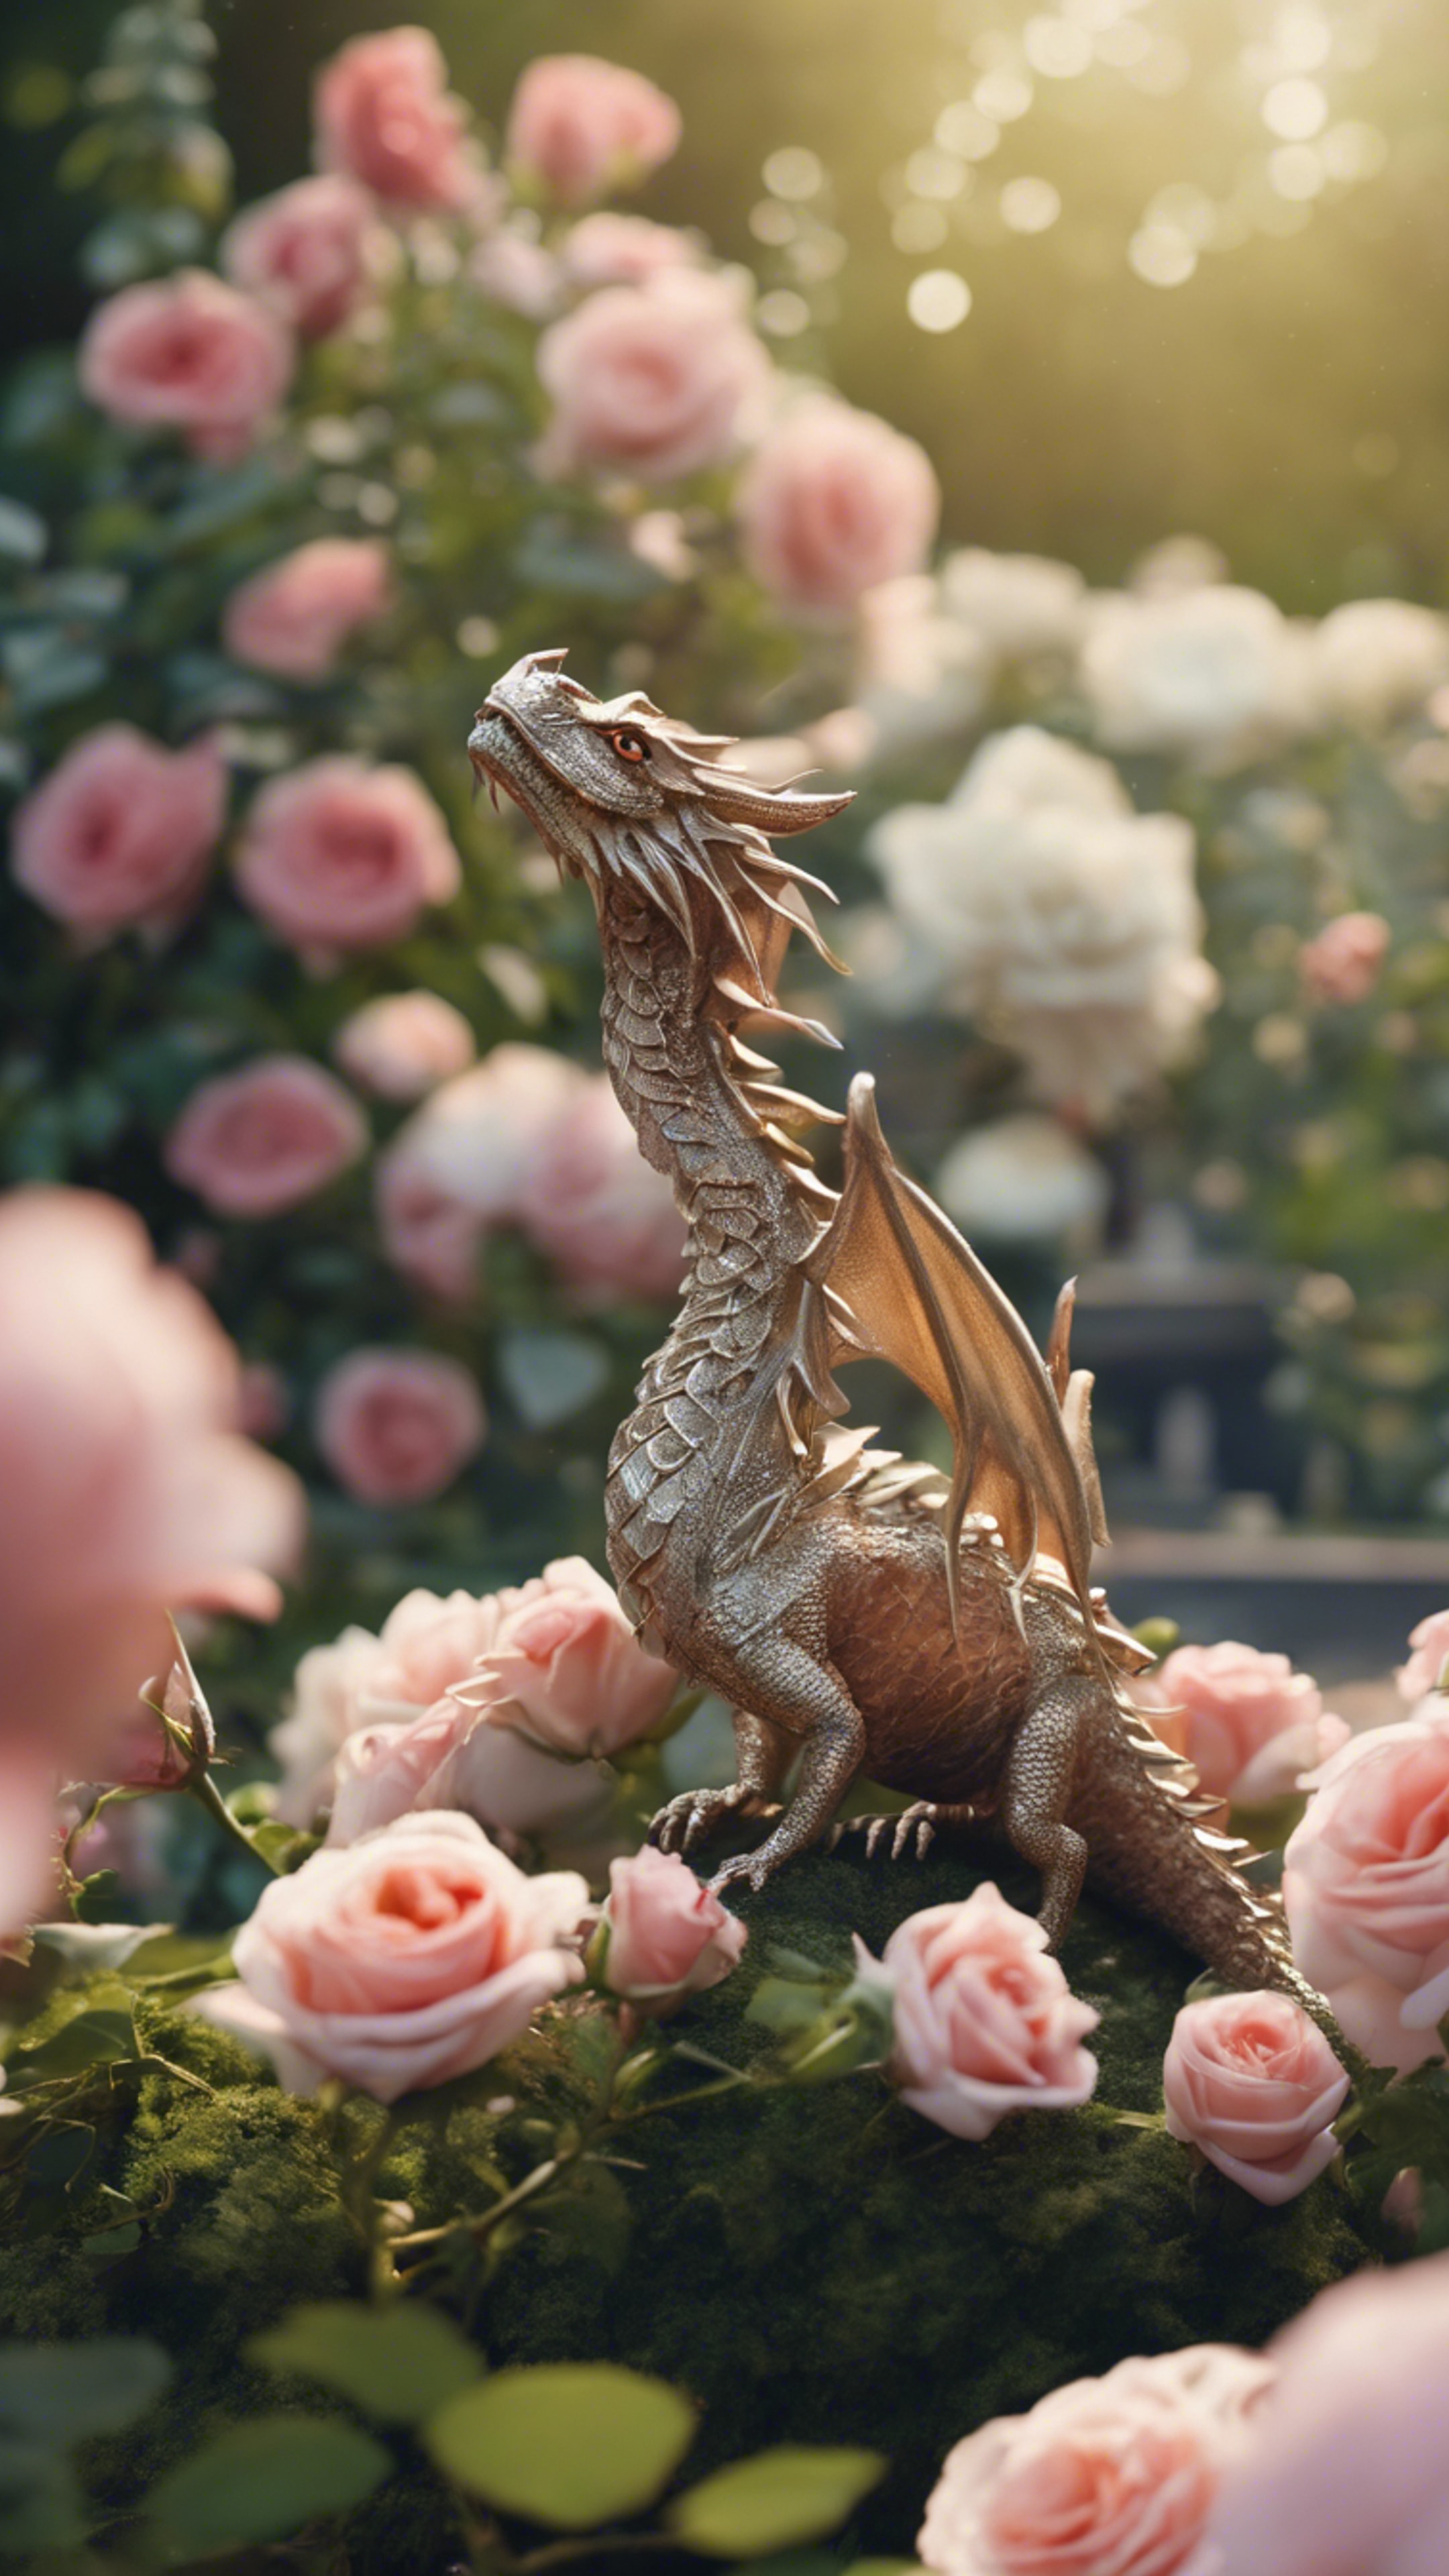 A peaceful garden scene with a tiny, delicate dragon hovering over blooming roses. Тапет[938d180fa7284dedb4af]